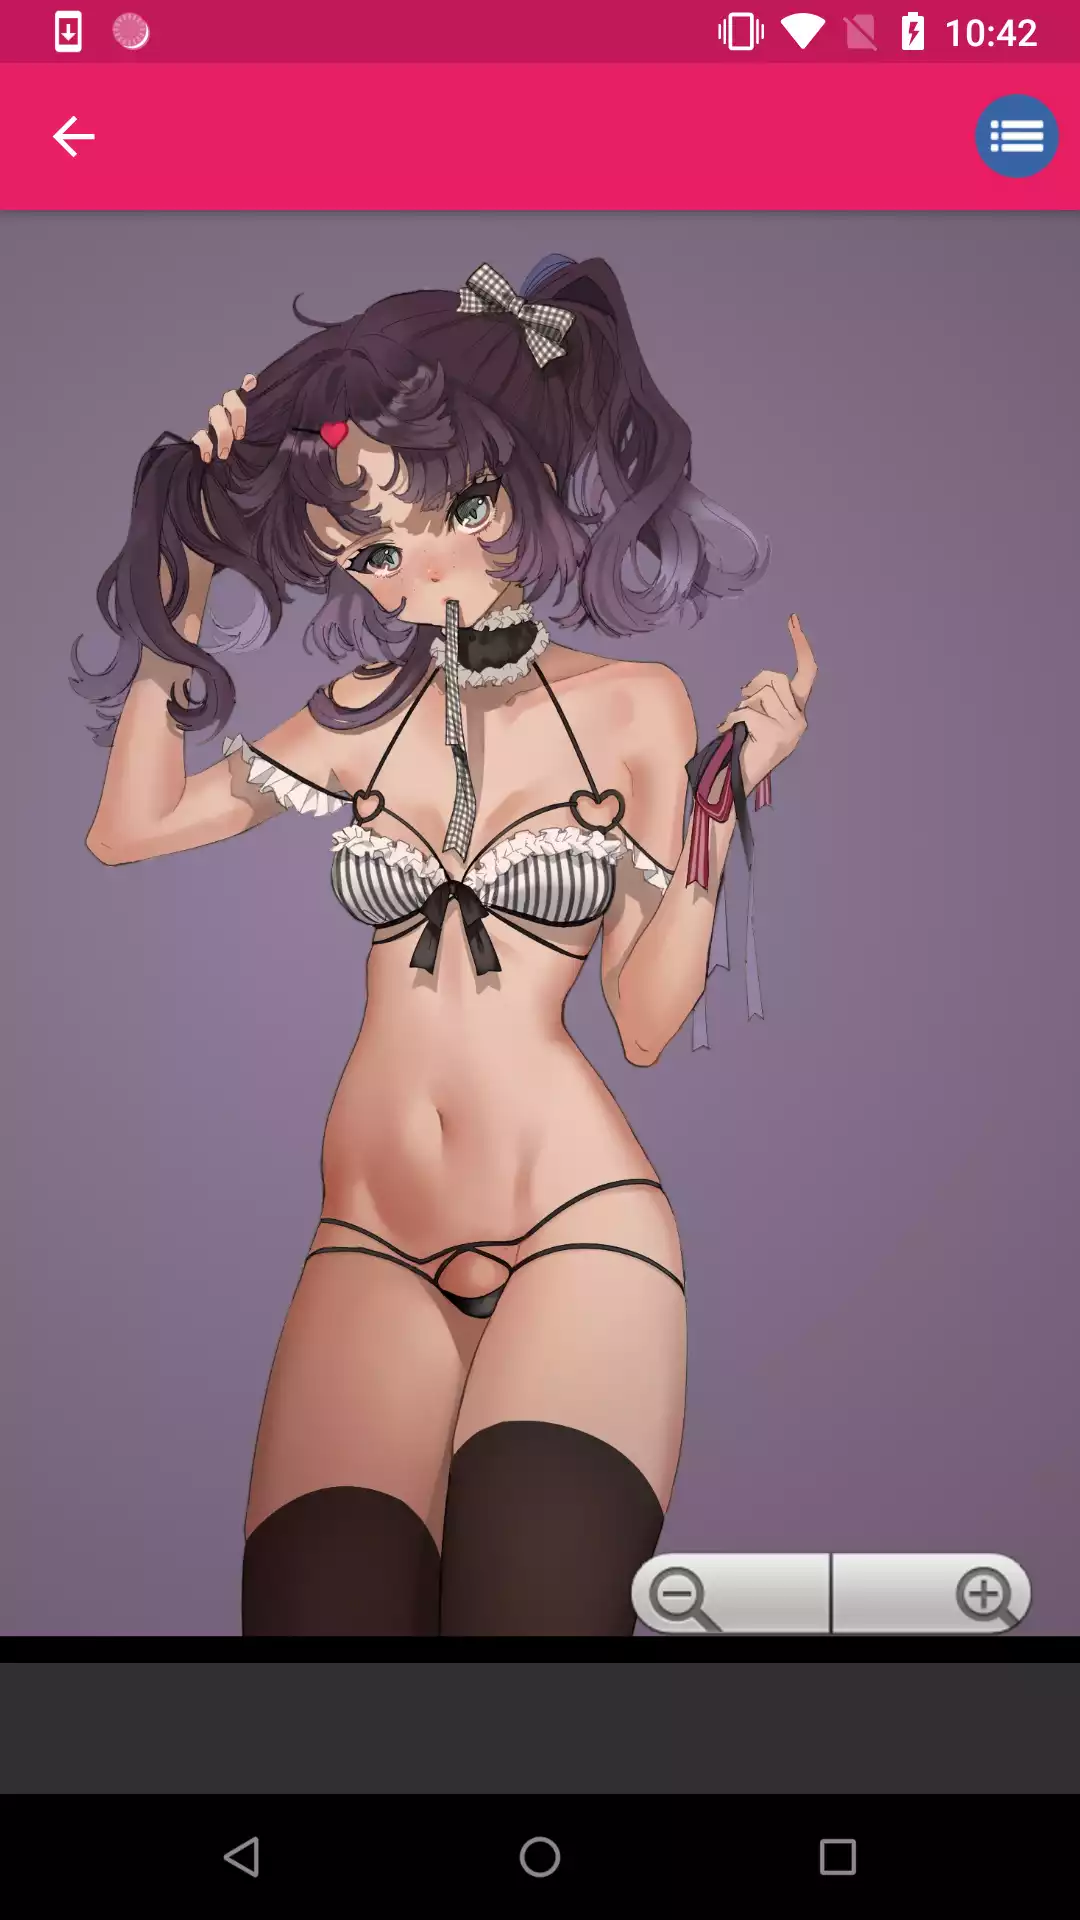 Sexy Anime Girls Wallpapers apk,backgrounds,photo,sexy,download,immage,pics,android,hentai,pic,app,best,girls,galleries,cosplay,anime,wallpapers